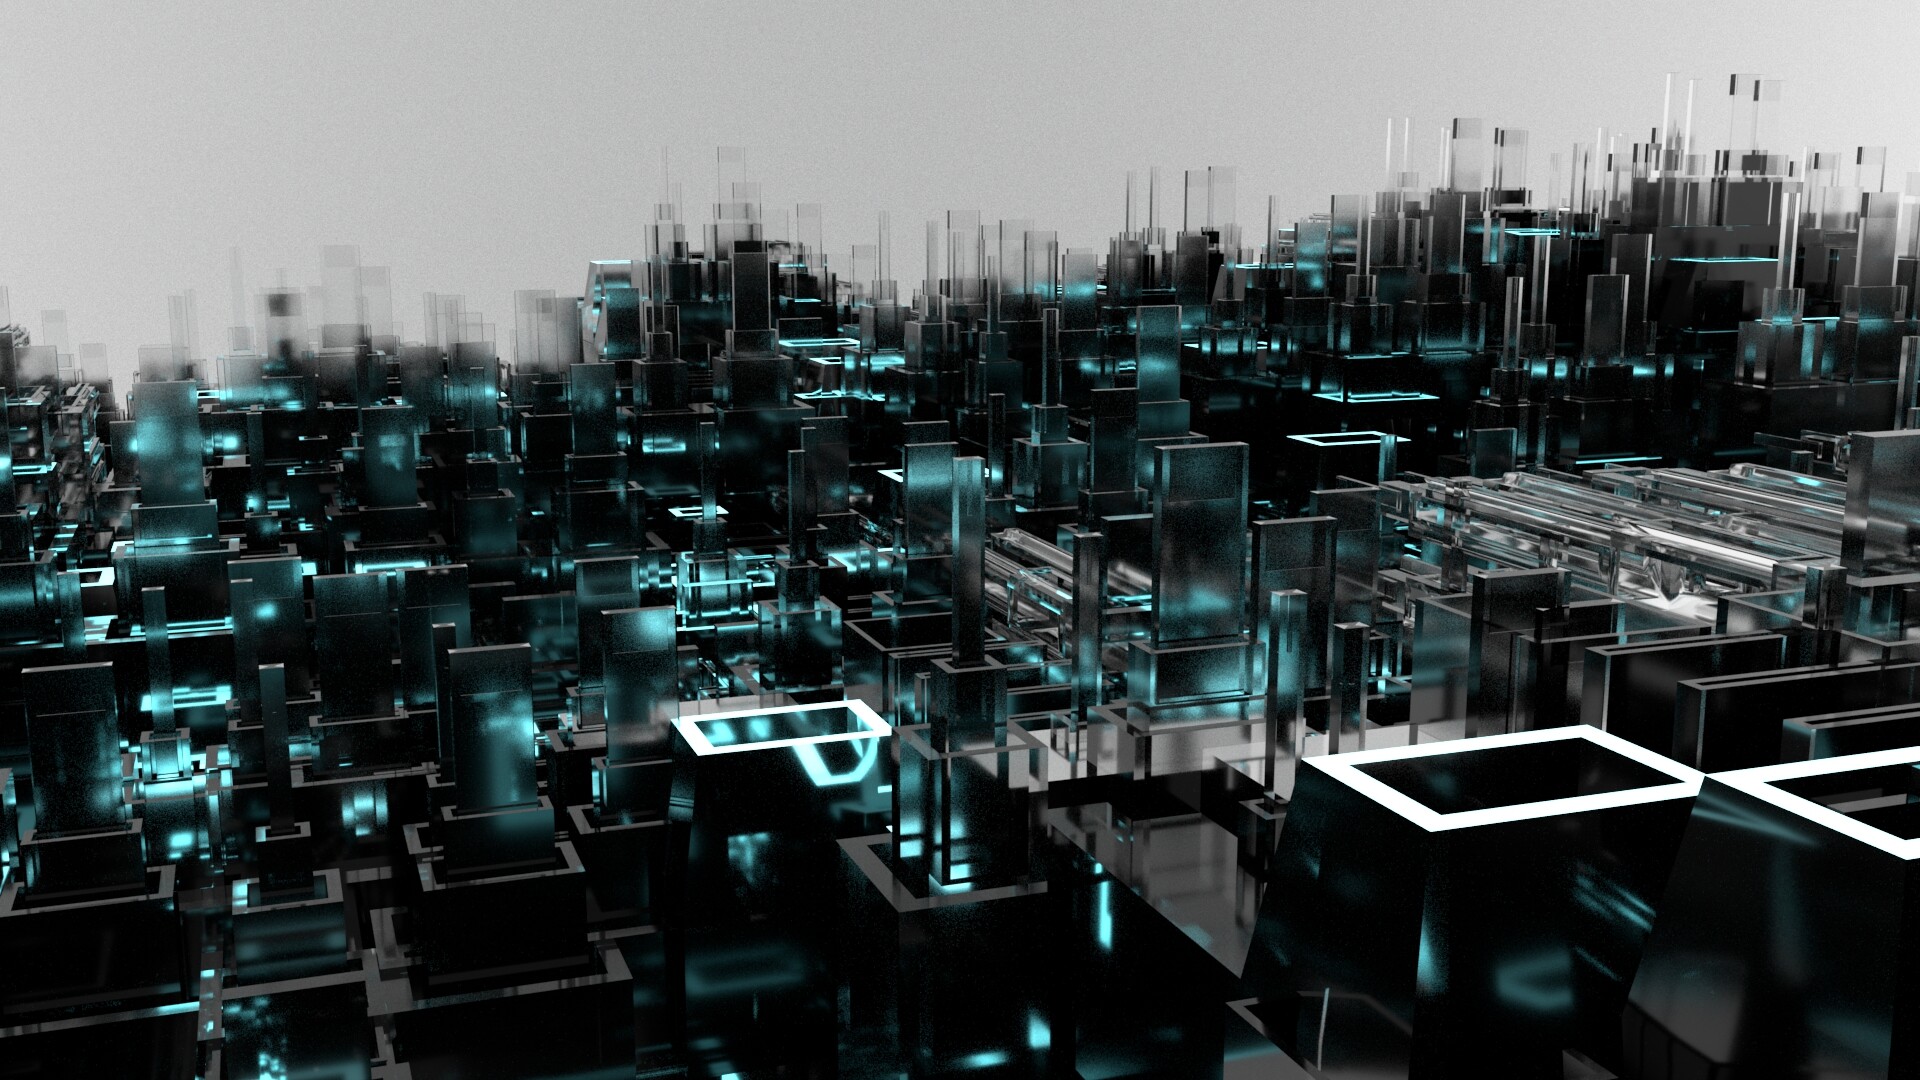 Cities of glass. Metropolis. Metropolis Красноярск. Enlightened Metropolis. Metropolis Project for after Effects.